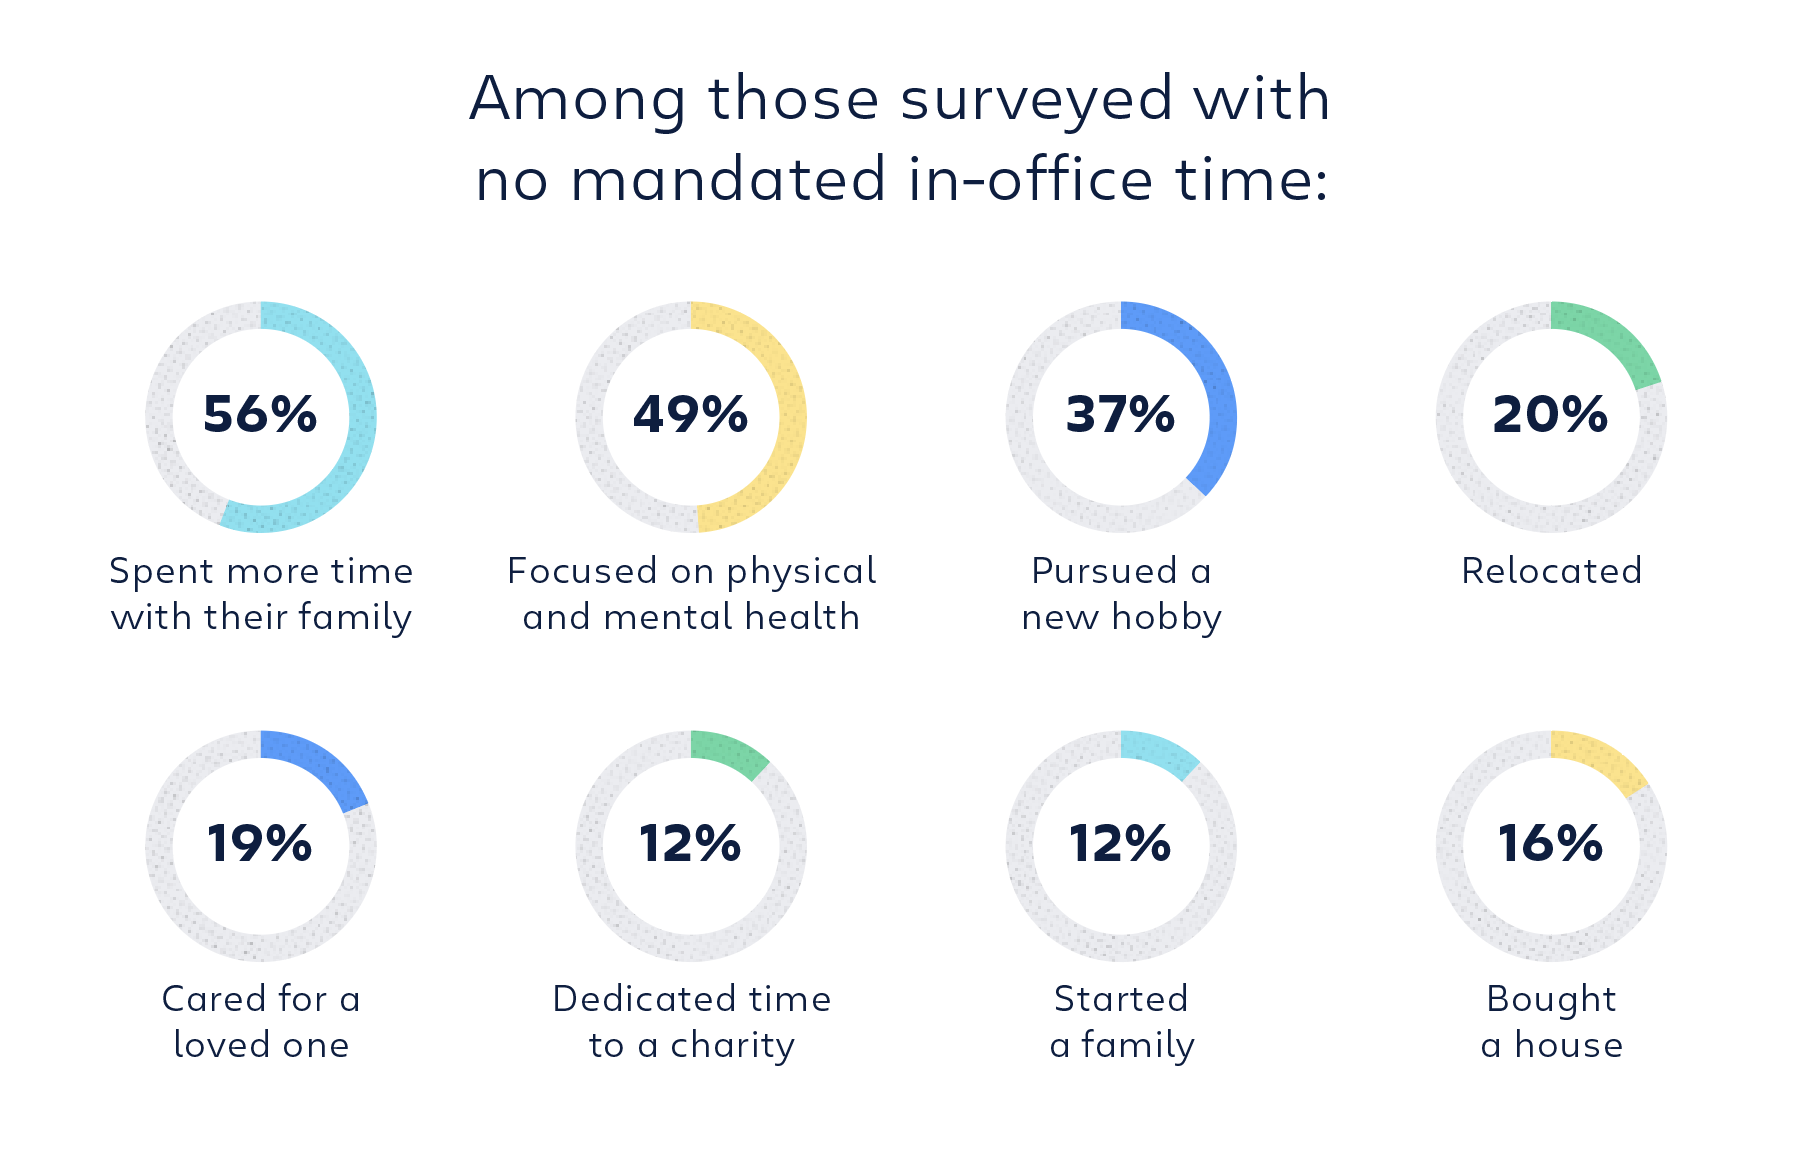 Workers without mandated office attendance have more time to spend time with family, focus on physical and mental health, pursue hobbies, care for loved ones, and volunteer.